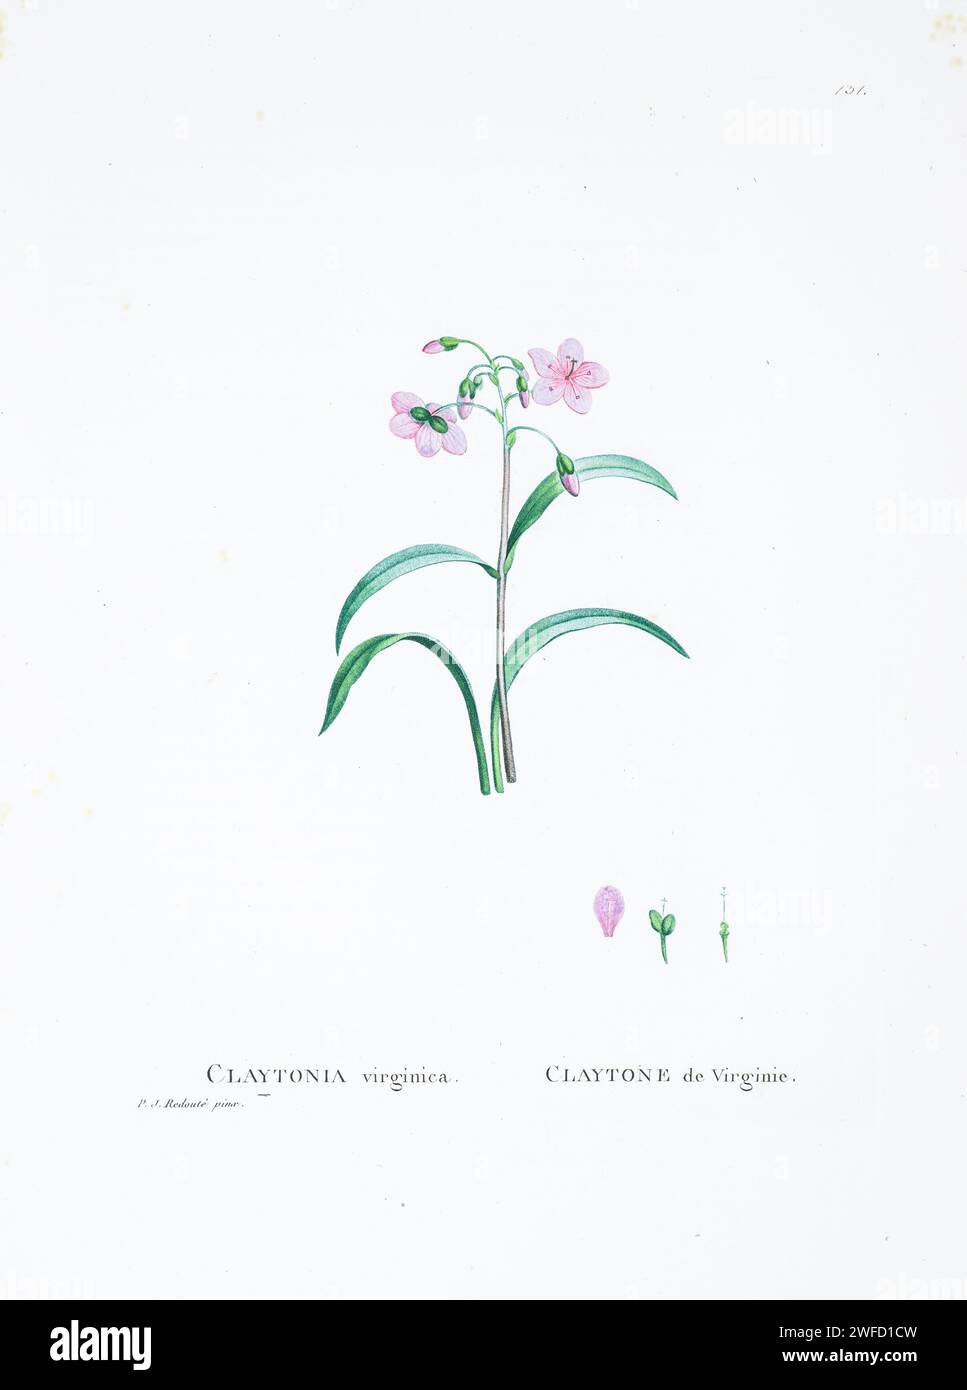 Claytonia grandiflora Sweet Here As Claytonia virginica Claytonia grandiflora Sweet Here As Claytonia virginica from History of Succulent Plants [Plantarum historia succulentarum / Histoire des plantes grasses] painted by Pierre-Joseph Redouté and described by Augustin Pyramus de Candolle 1799 Stock Photo